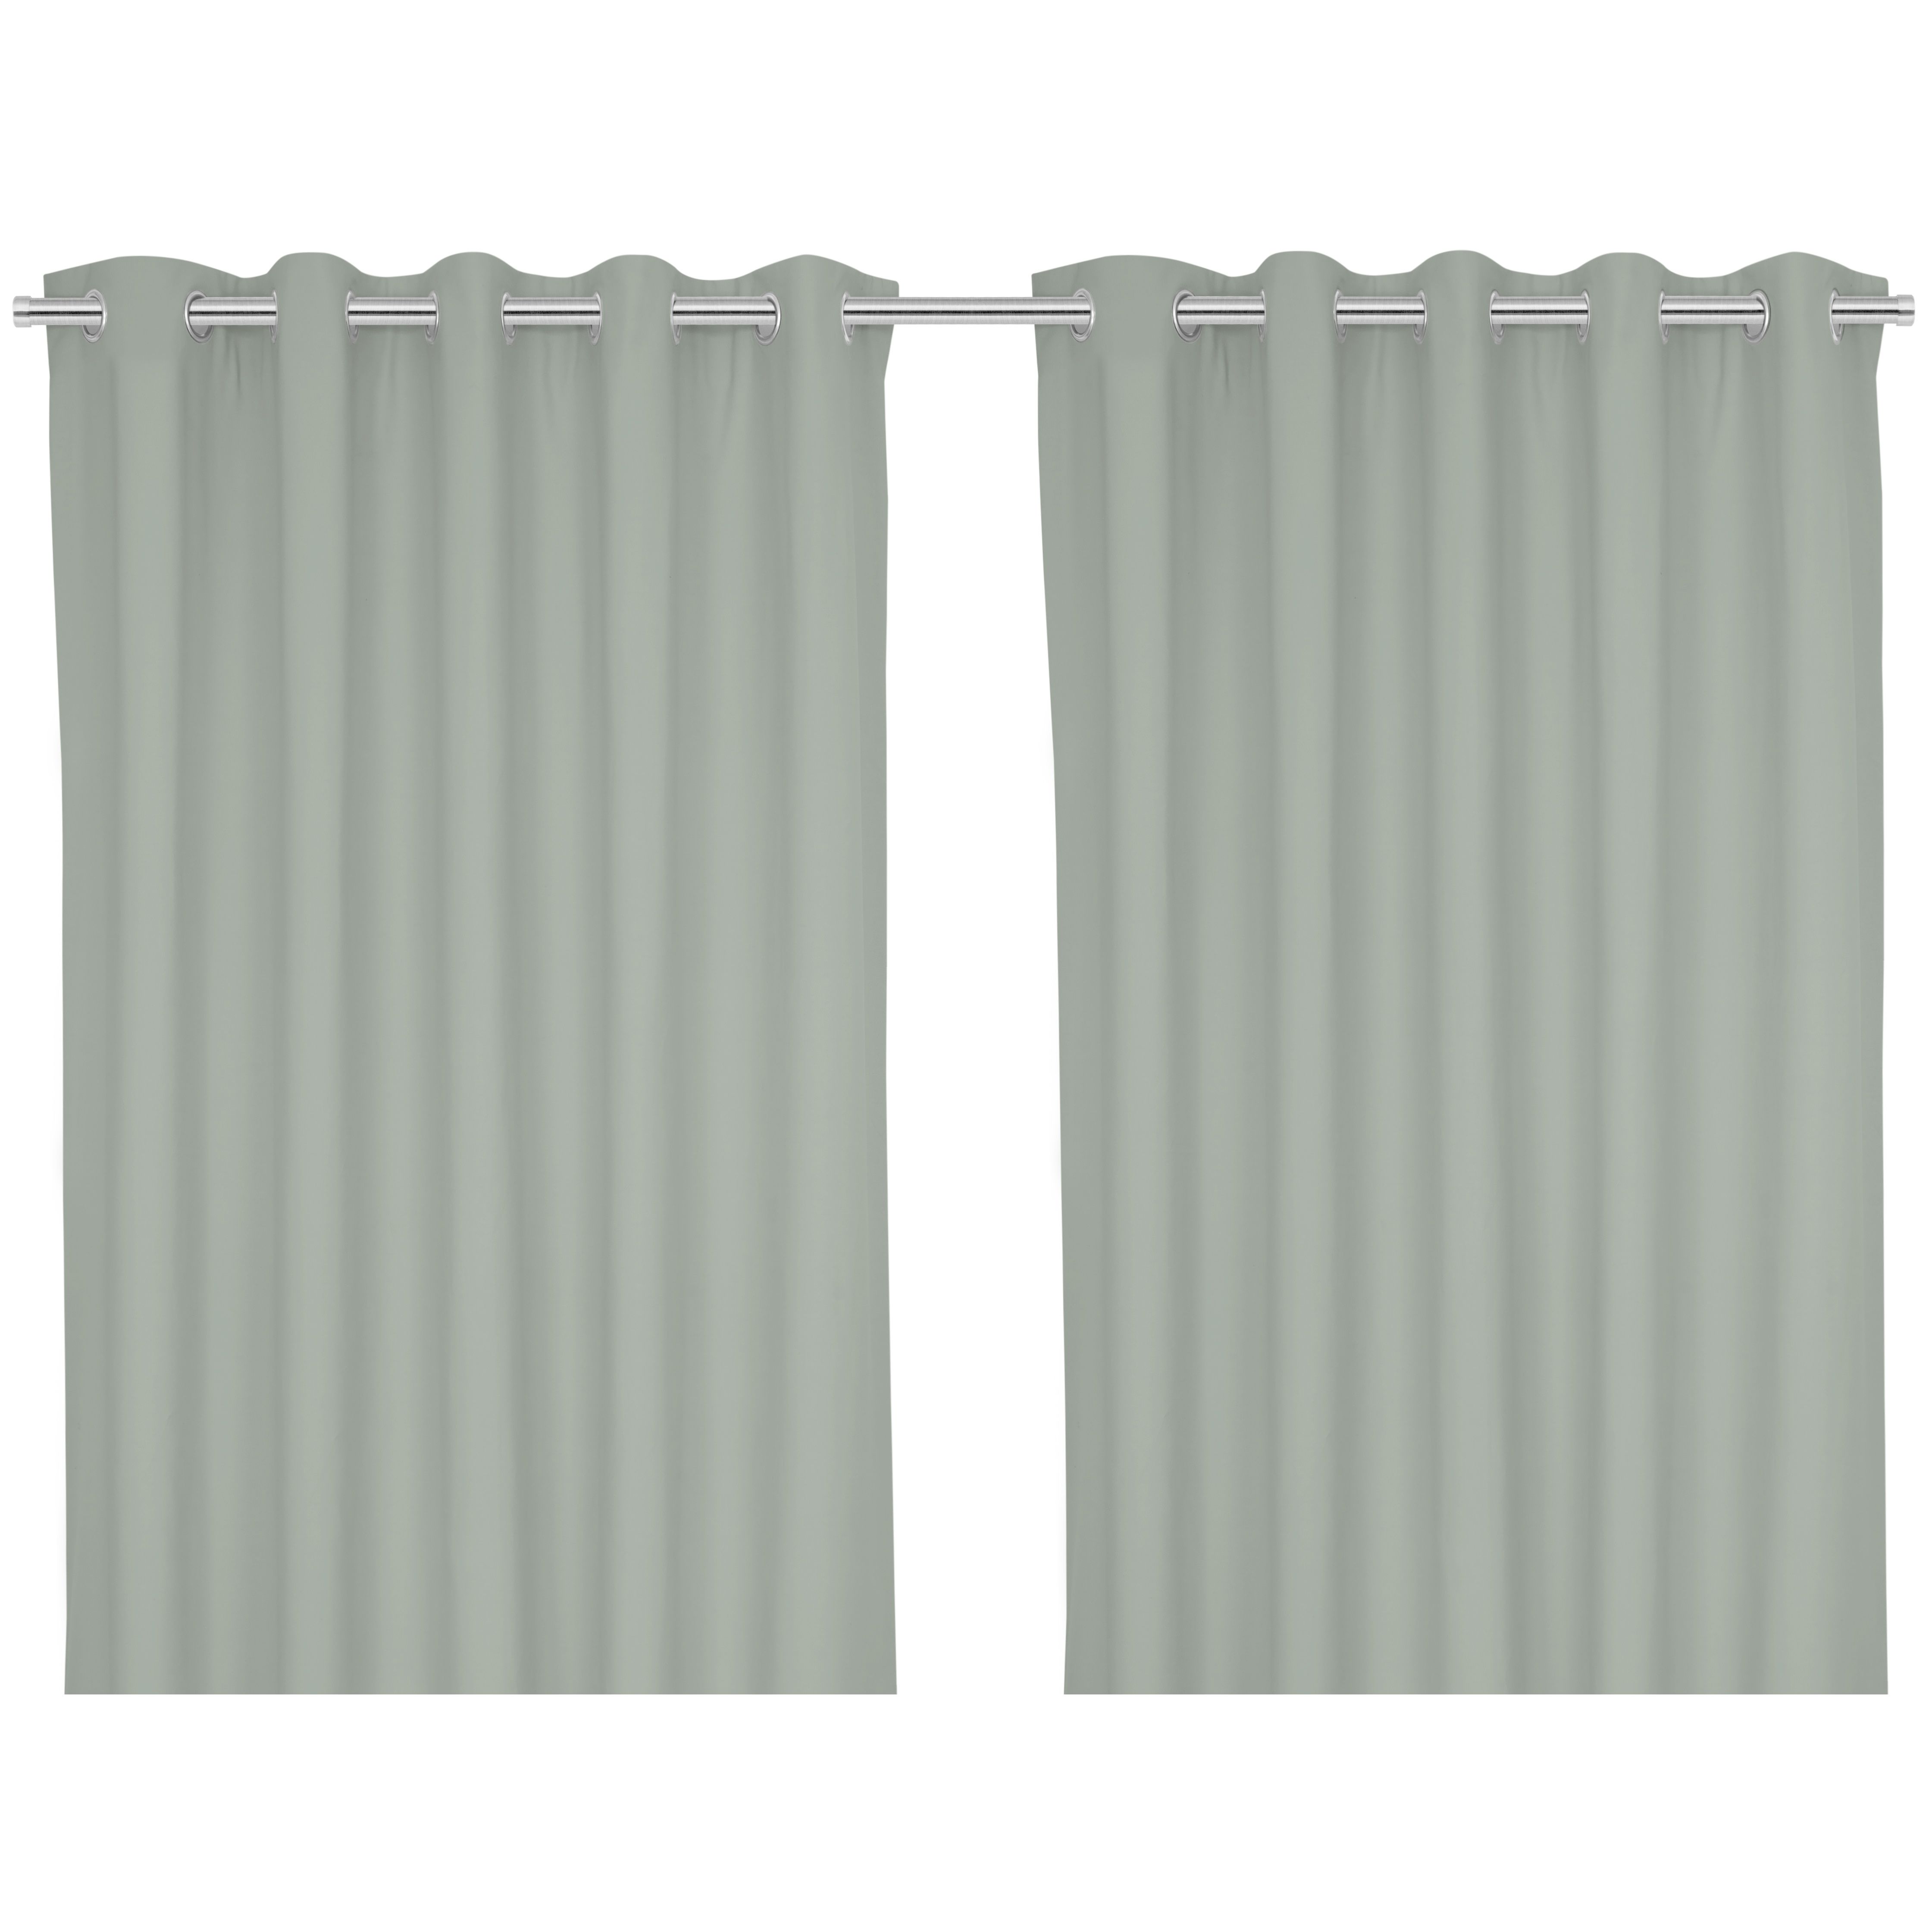 Hiva Light grey Solid dyed Lined Eyelet Curtain (W)167cm (L)183cm, Pair